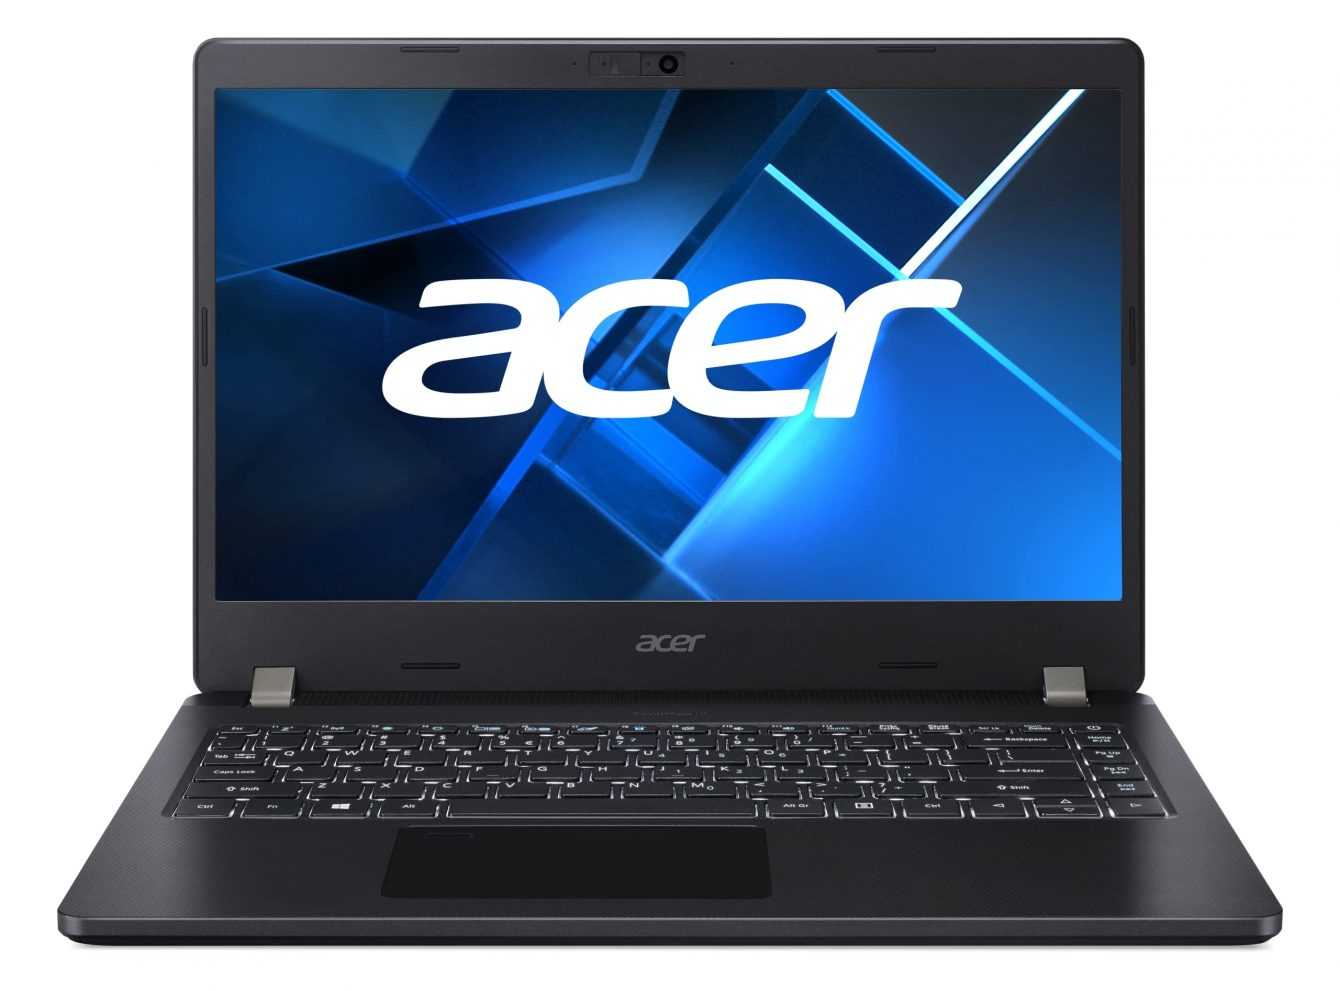 Acer: Update TravelMate Professional Laptops